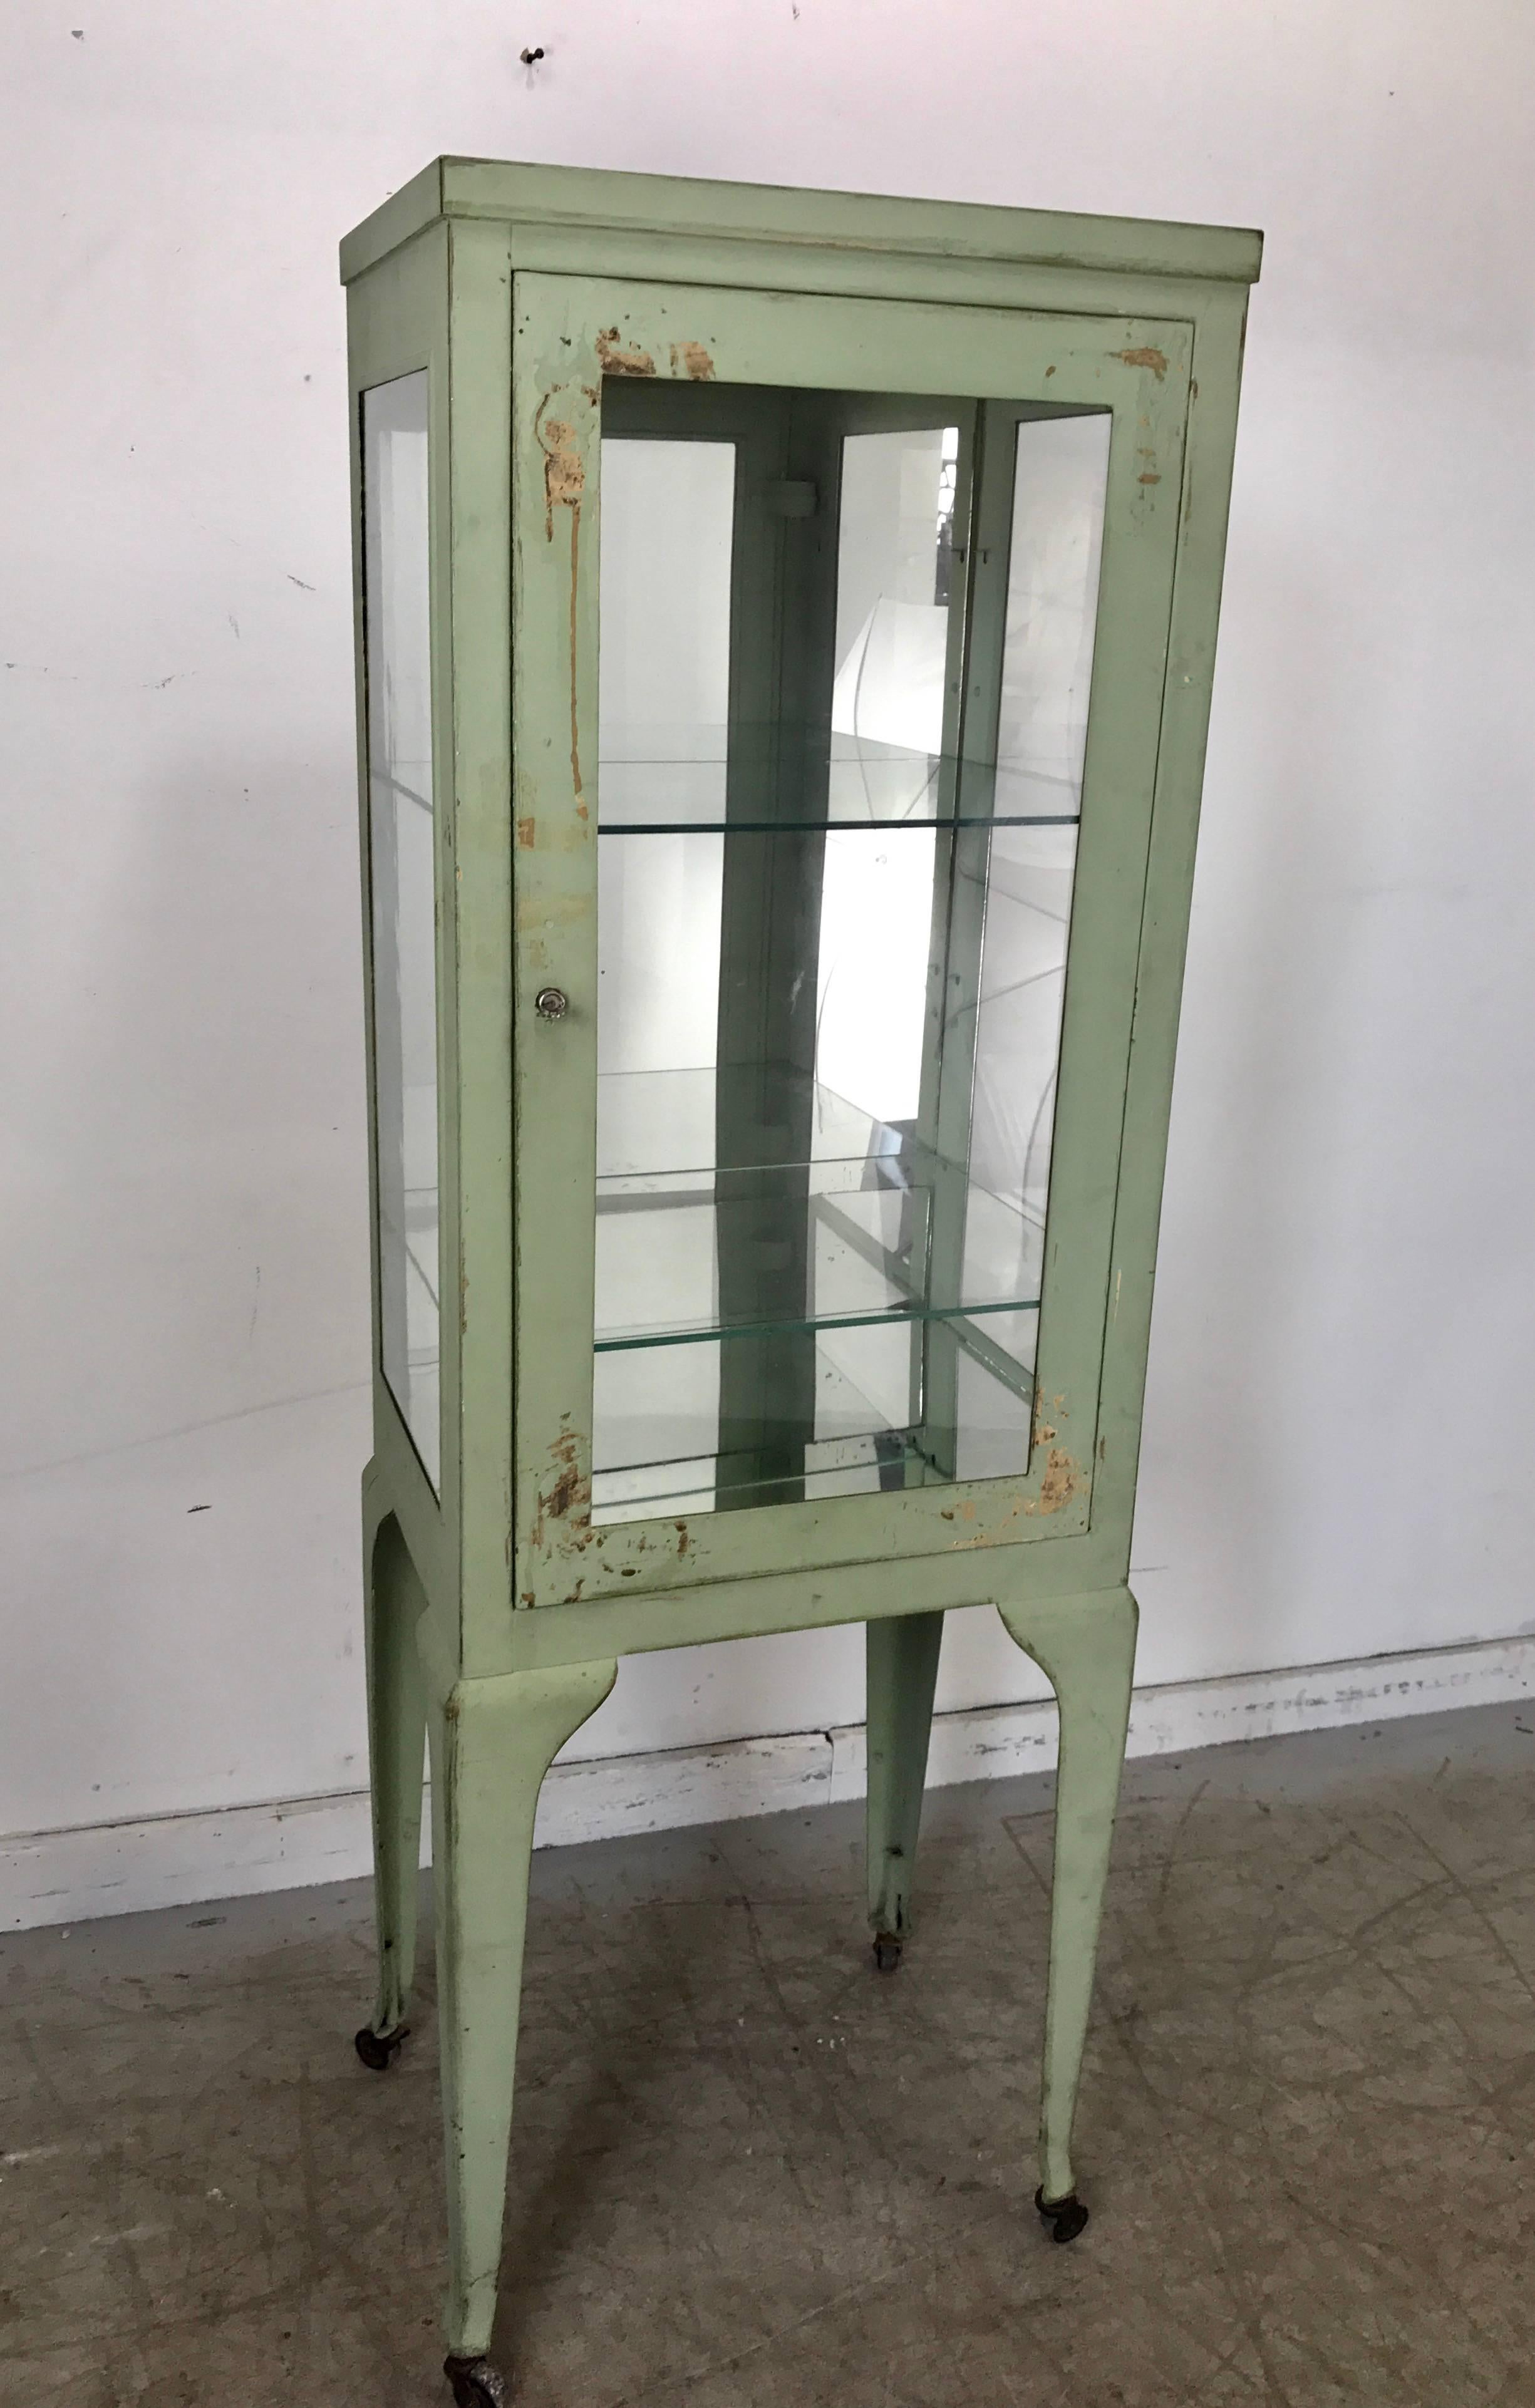 Early 20th Century Classic 1920s Metal and Glass Specimen Cabinet, Medical, Industrial